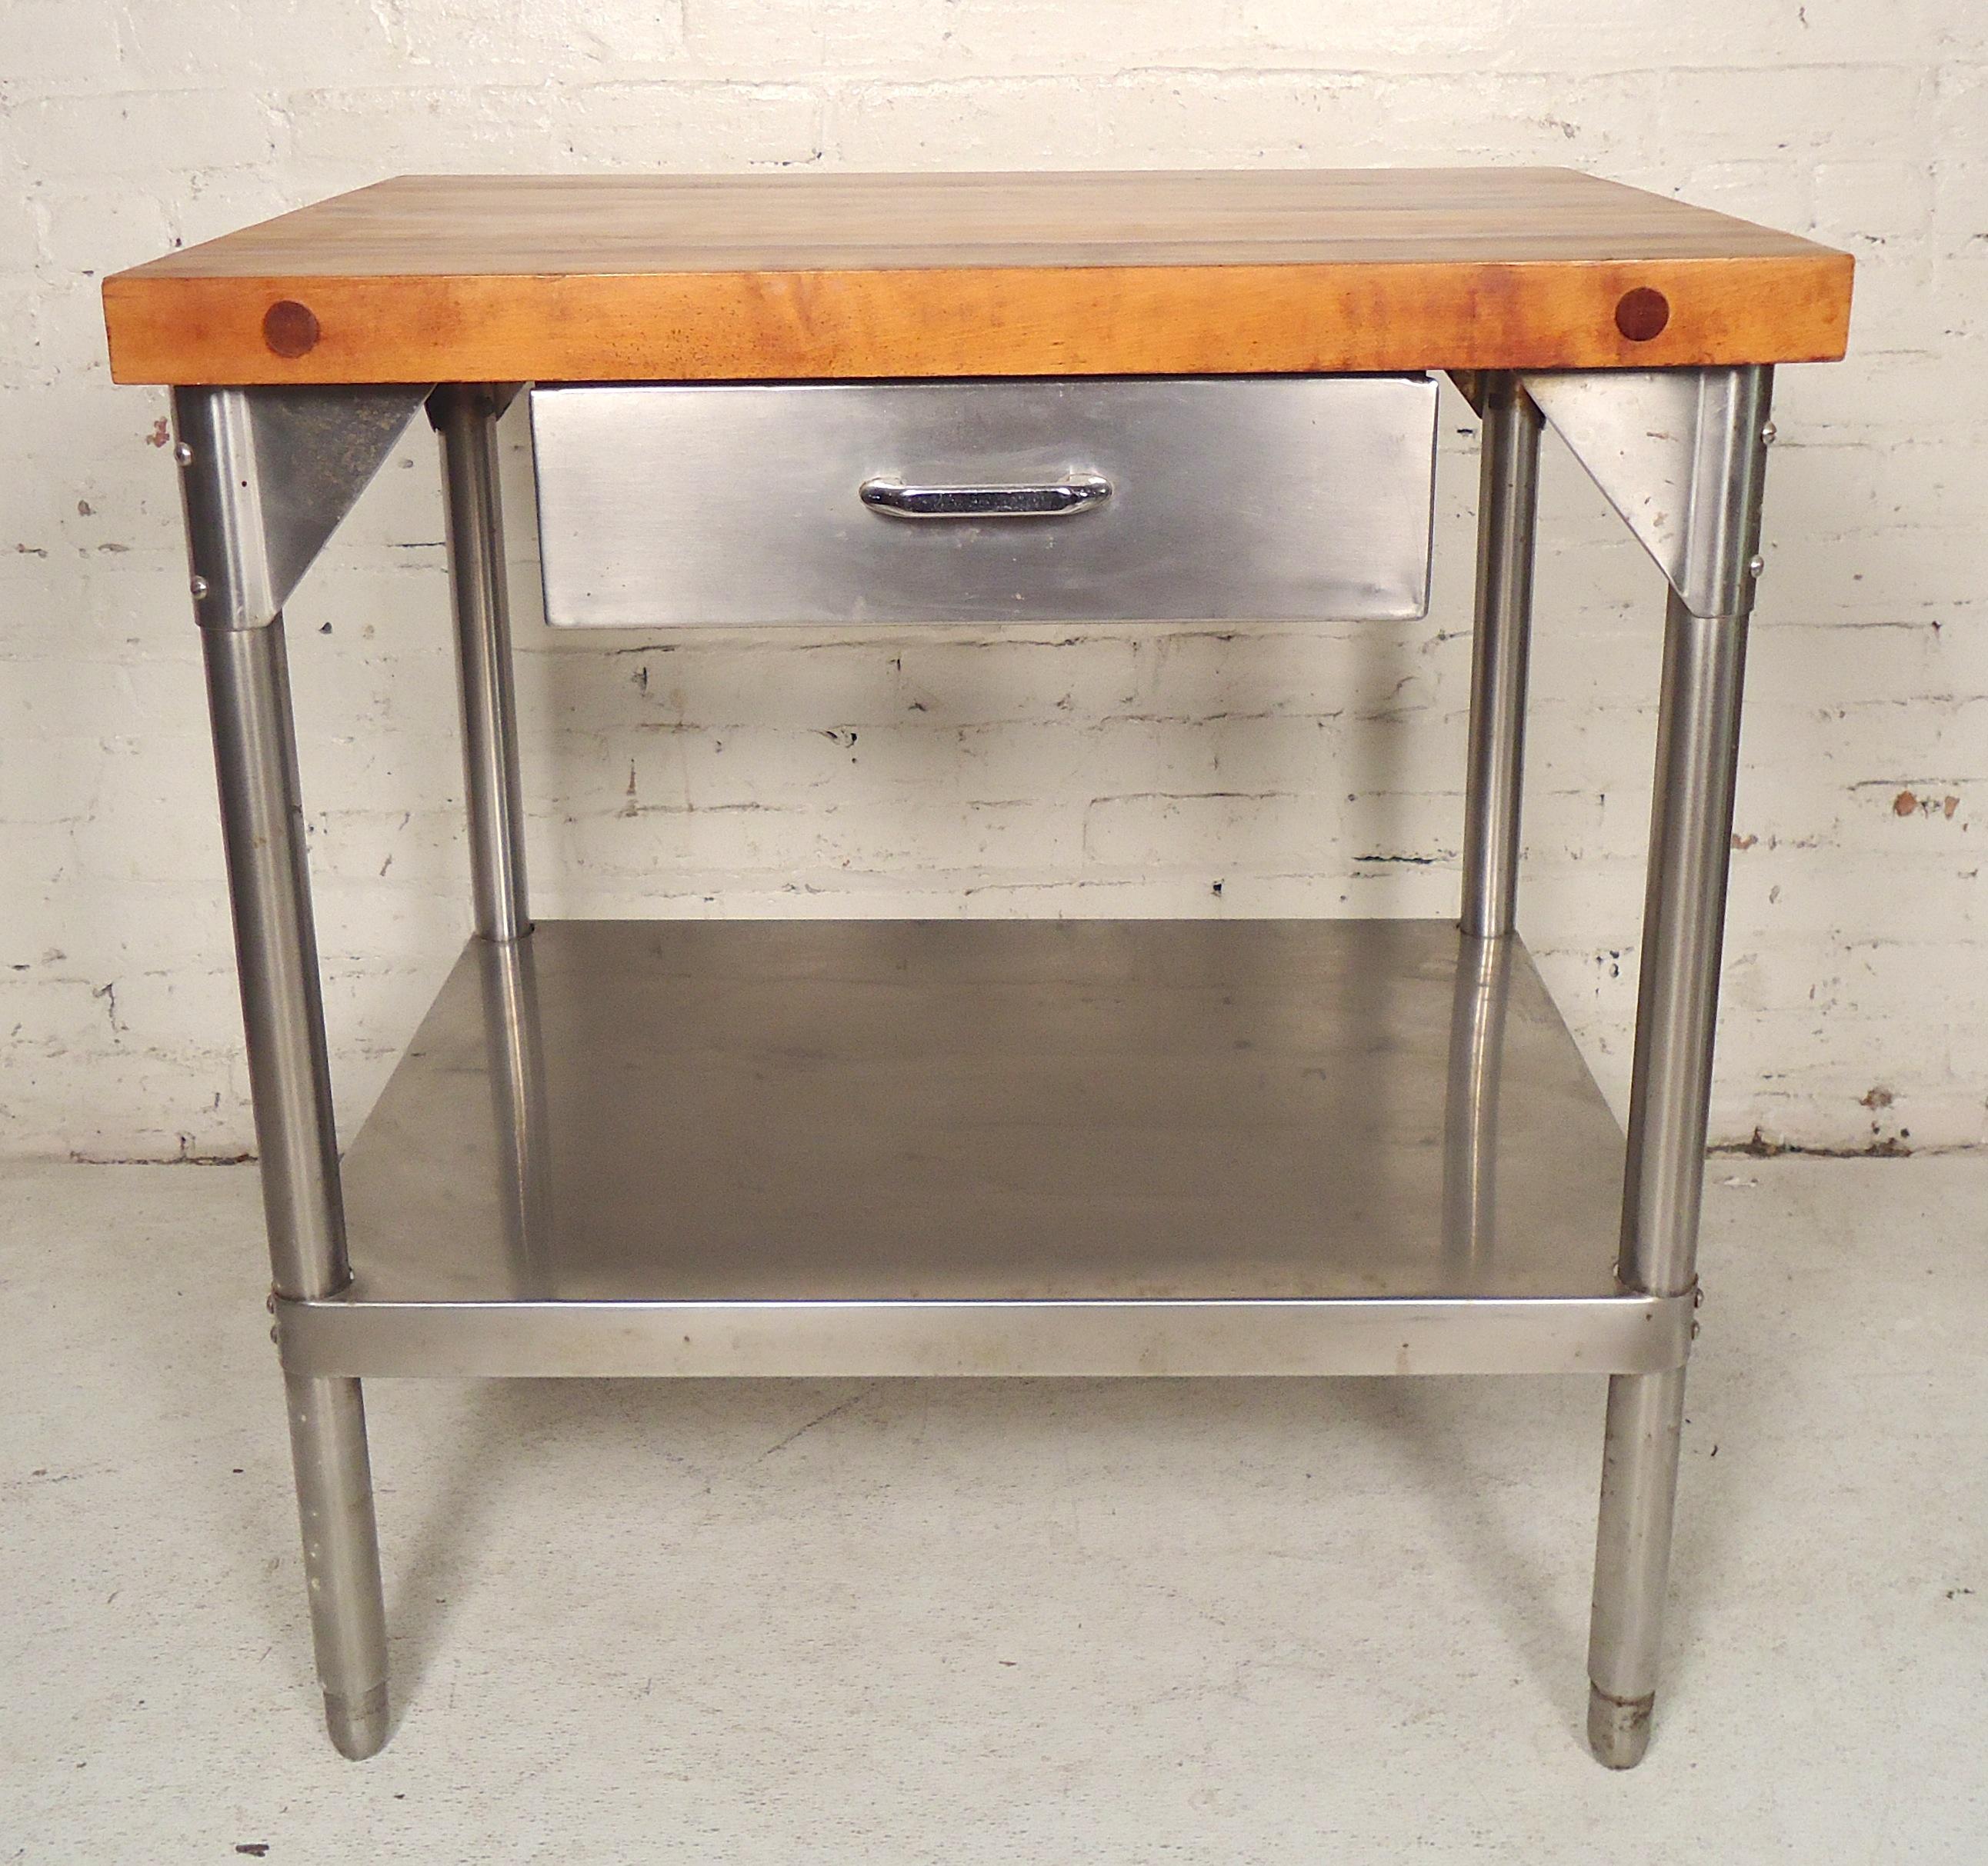 Stainless steel table with shelf and drawer storage with a thick wood top for cutting.

(Please confirm item location - NY or NJ - with dealer).
 